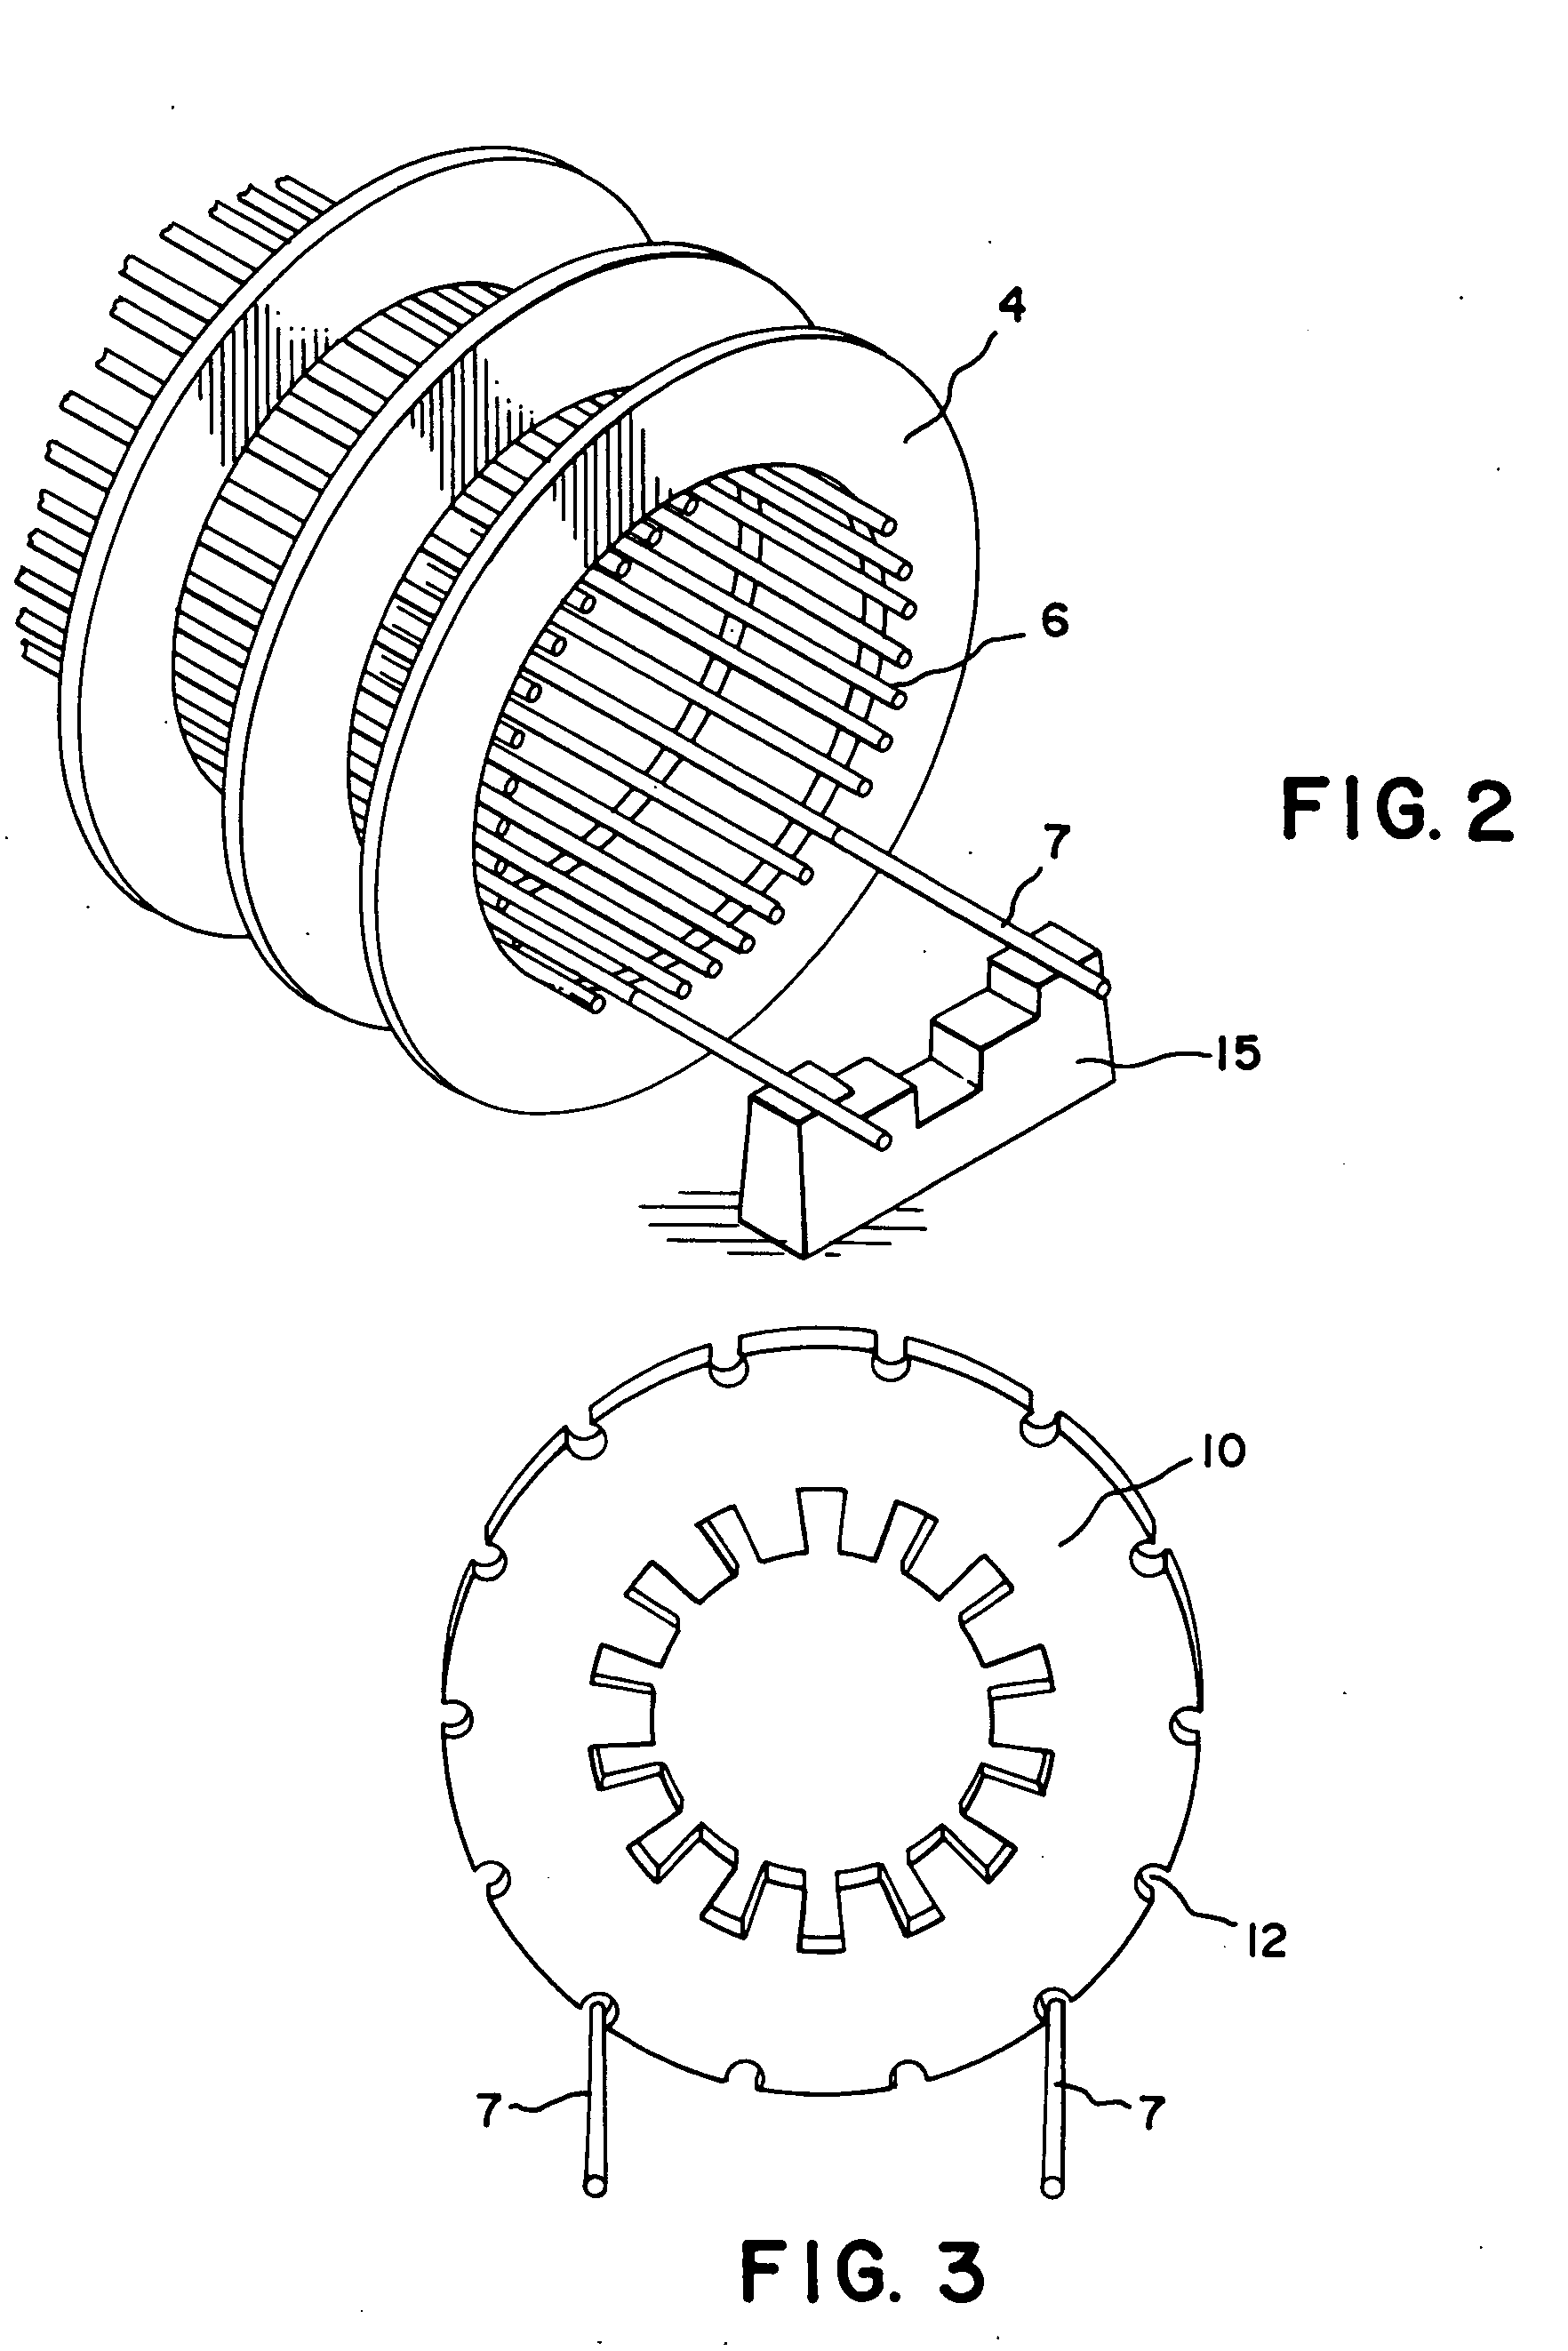 Horizontal assembly of stator core using keybar extensions